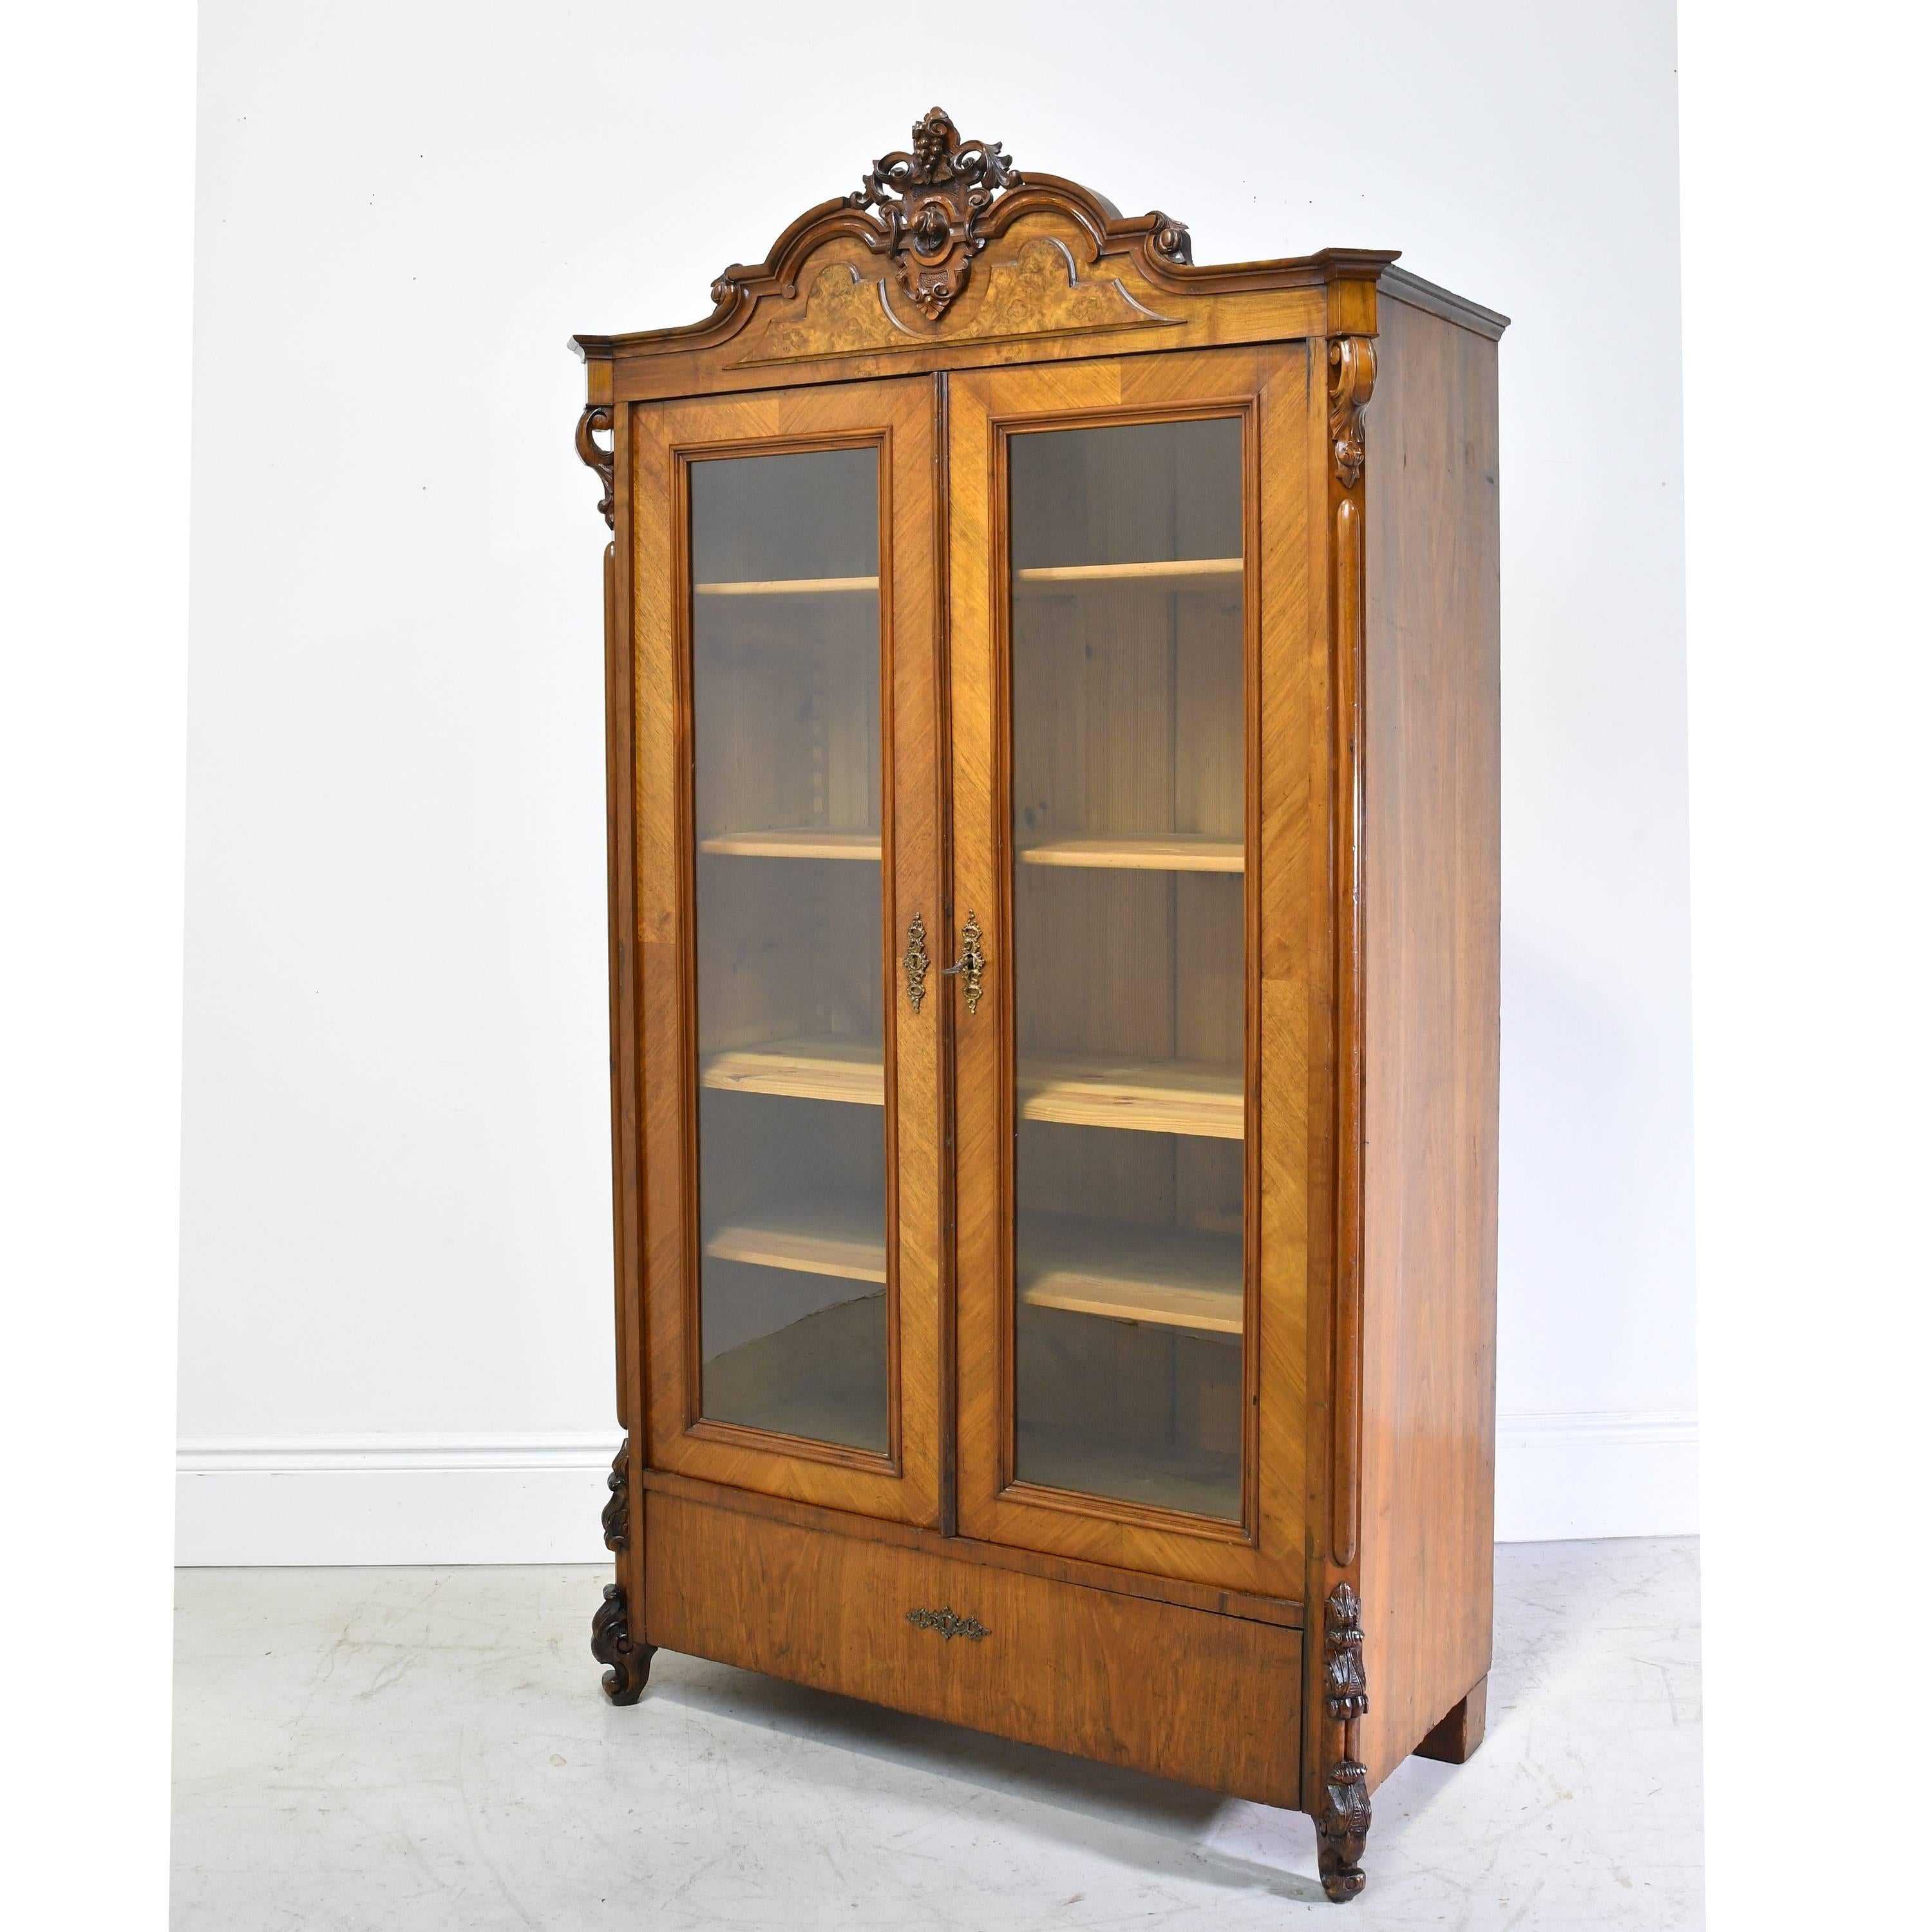 A very lovely Louis Philippe bookcase or display case in walnut with carved bonnet over arched crest, two doors with glass panels, and resting on carved scroll feet. Has four adjustable shelves, original hardware with working lock on doors. Exterior